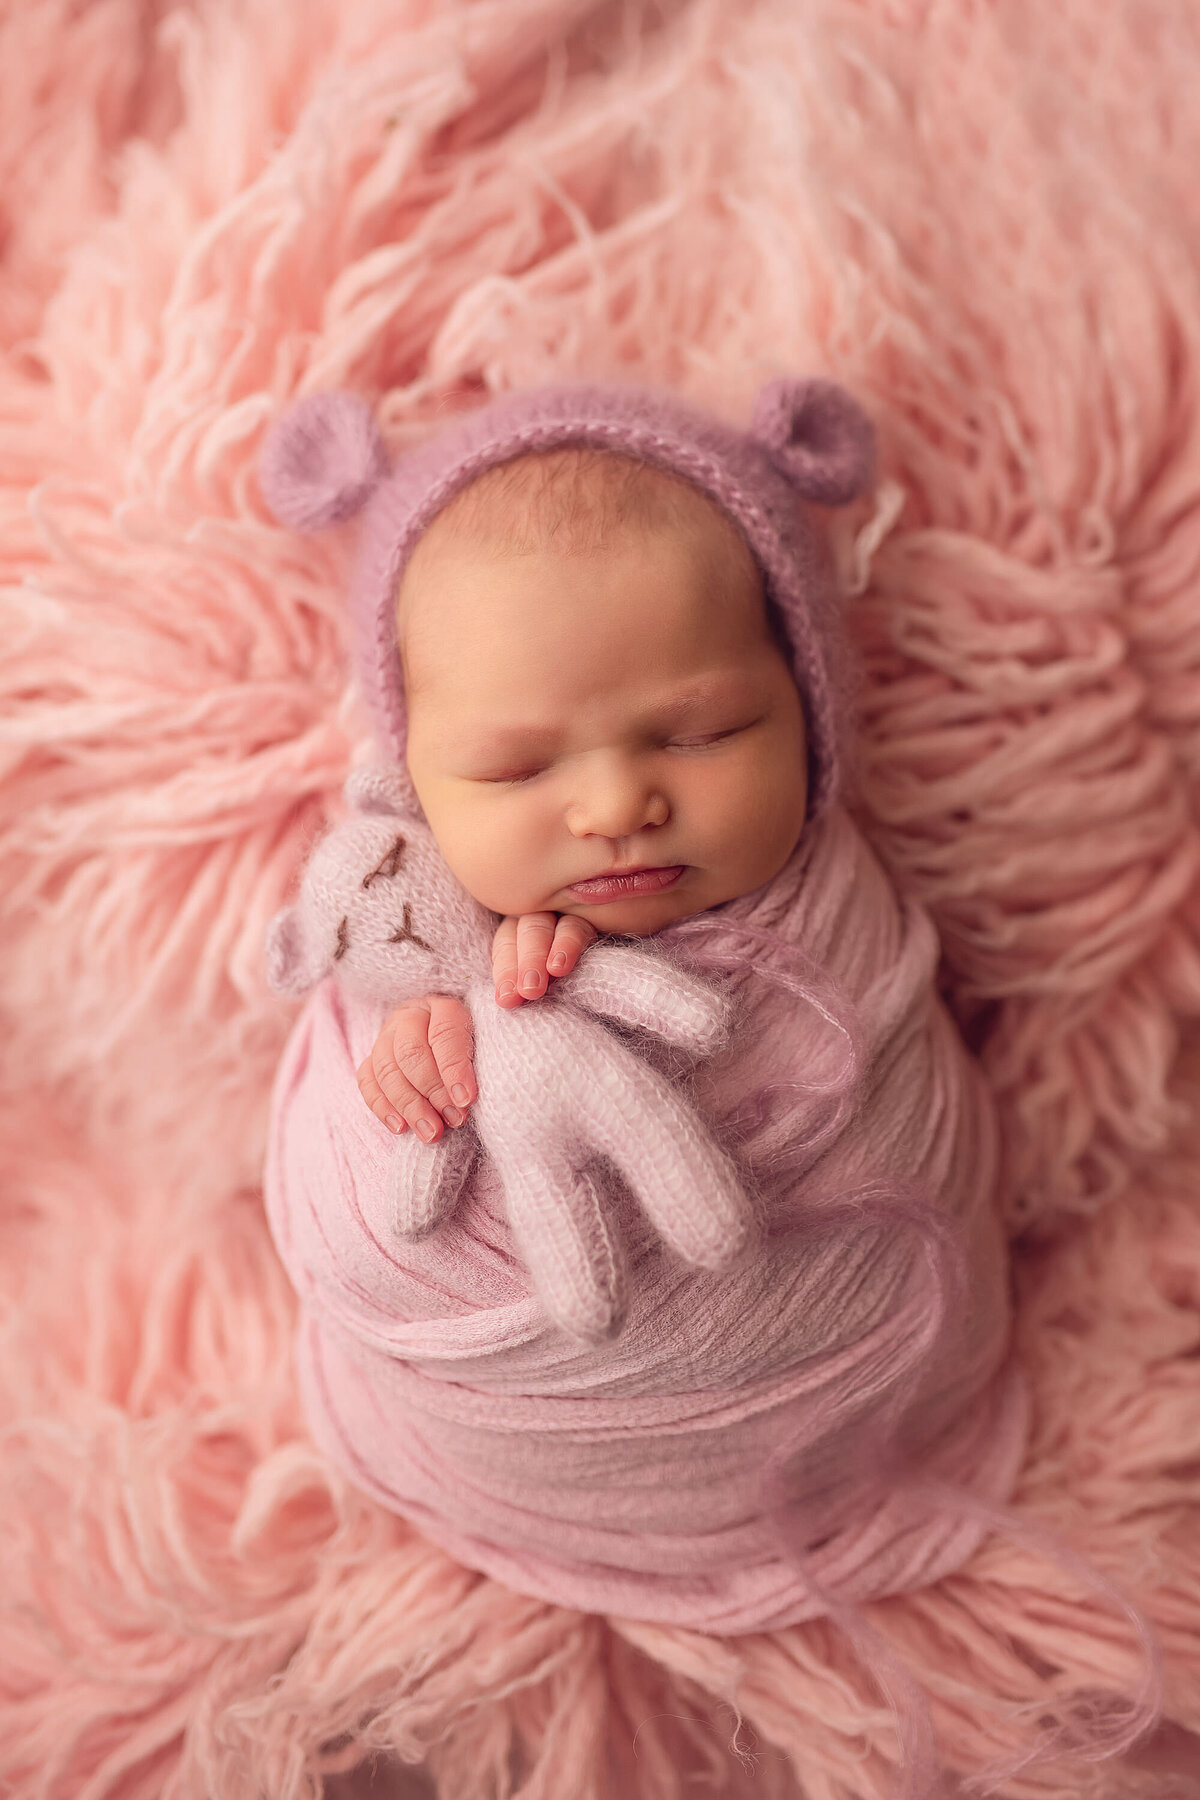 Tiny baby girl poses, sleeping, in our Waukesha studio. She is swaddled in pink muslin laid on a pink , shag rug while clutching a tiny pink teddy bear in her hands.